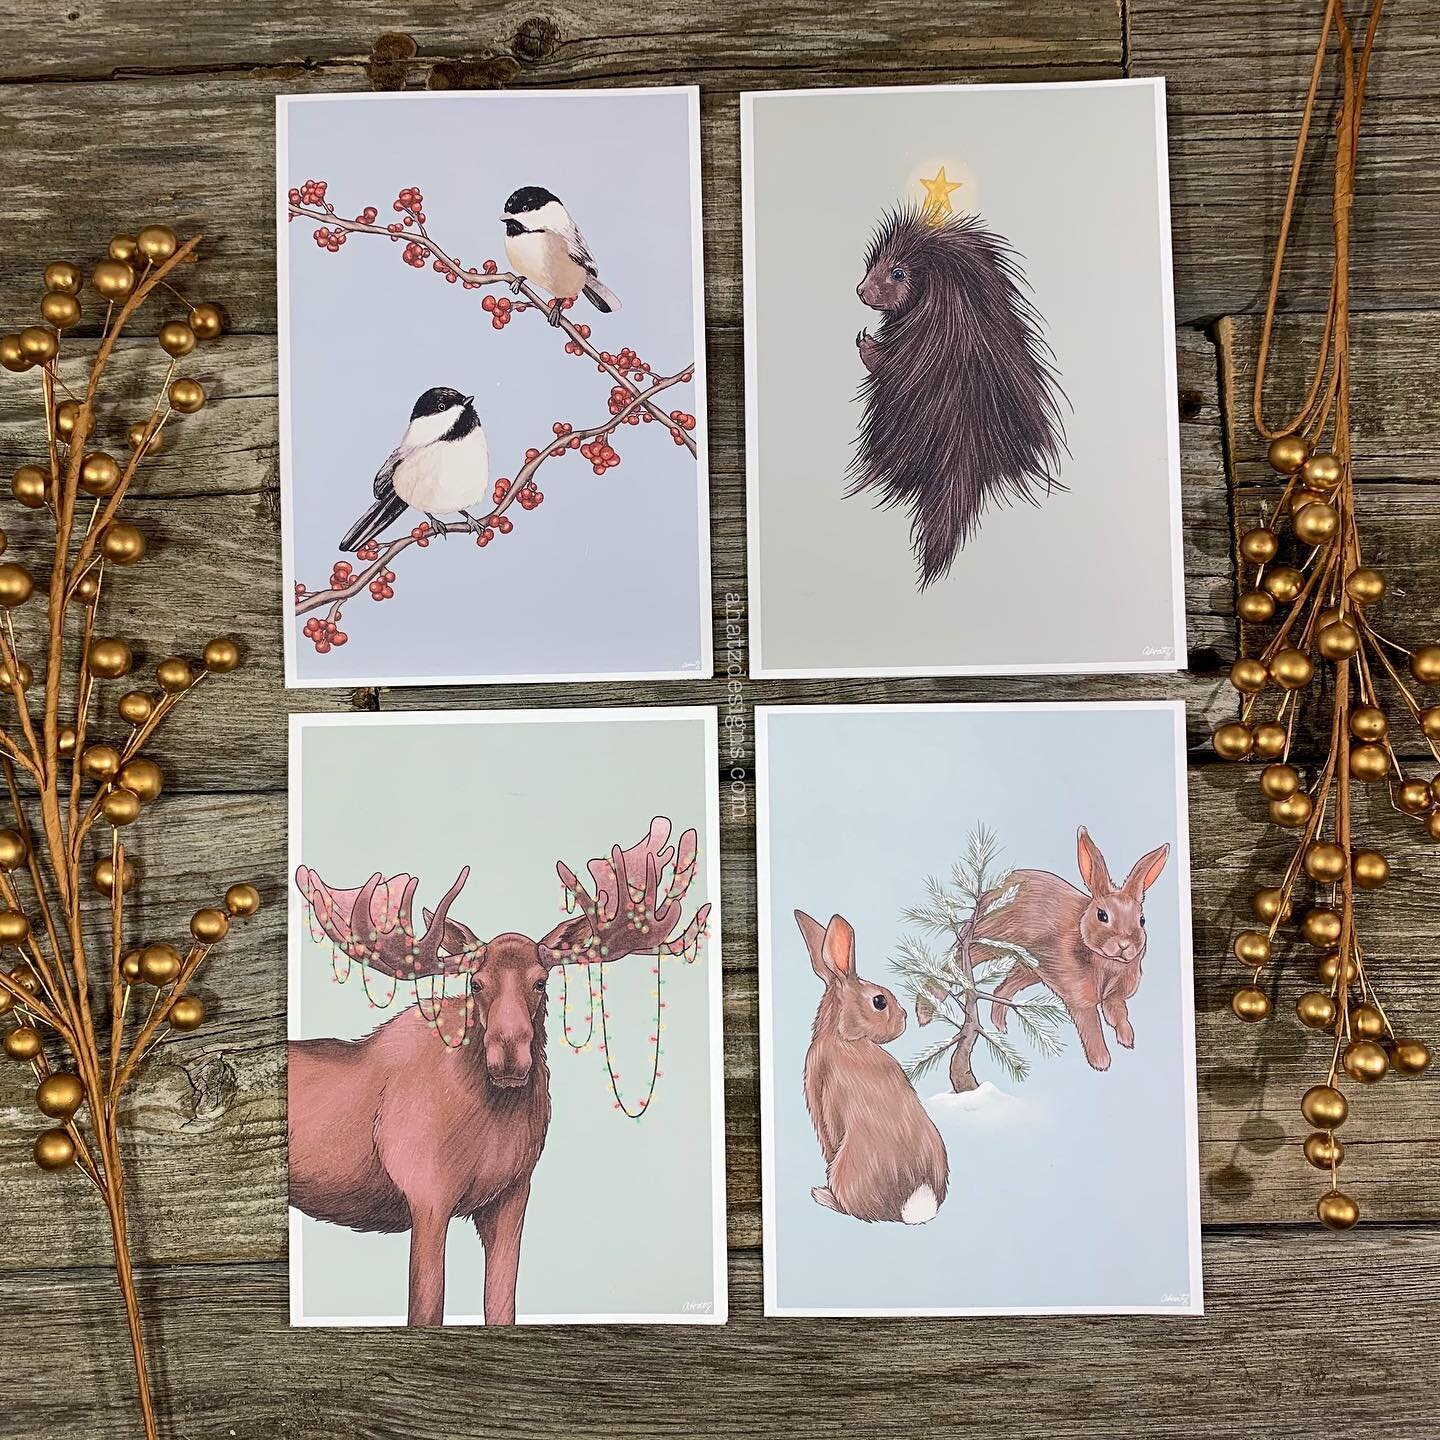 It is finally the most wonderful time of the year! I hope everyone is staying safe in these times, especially as the weather gets colder. ❄️
I am selling Christmas cards again this year, as well as gift tags! I would really appreciate it if you took 